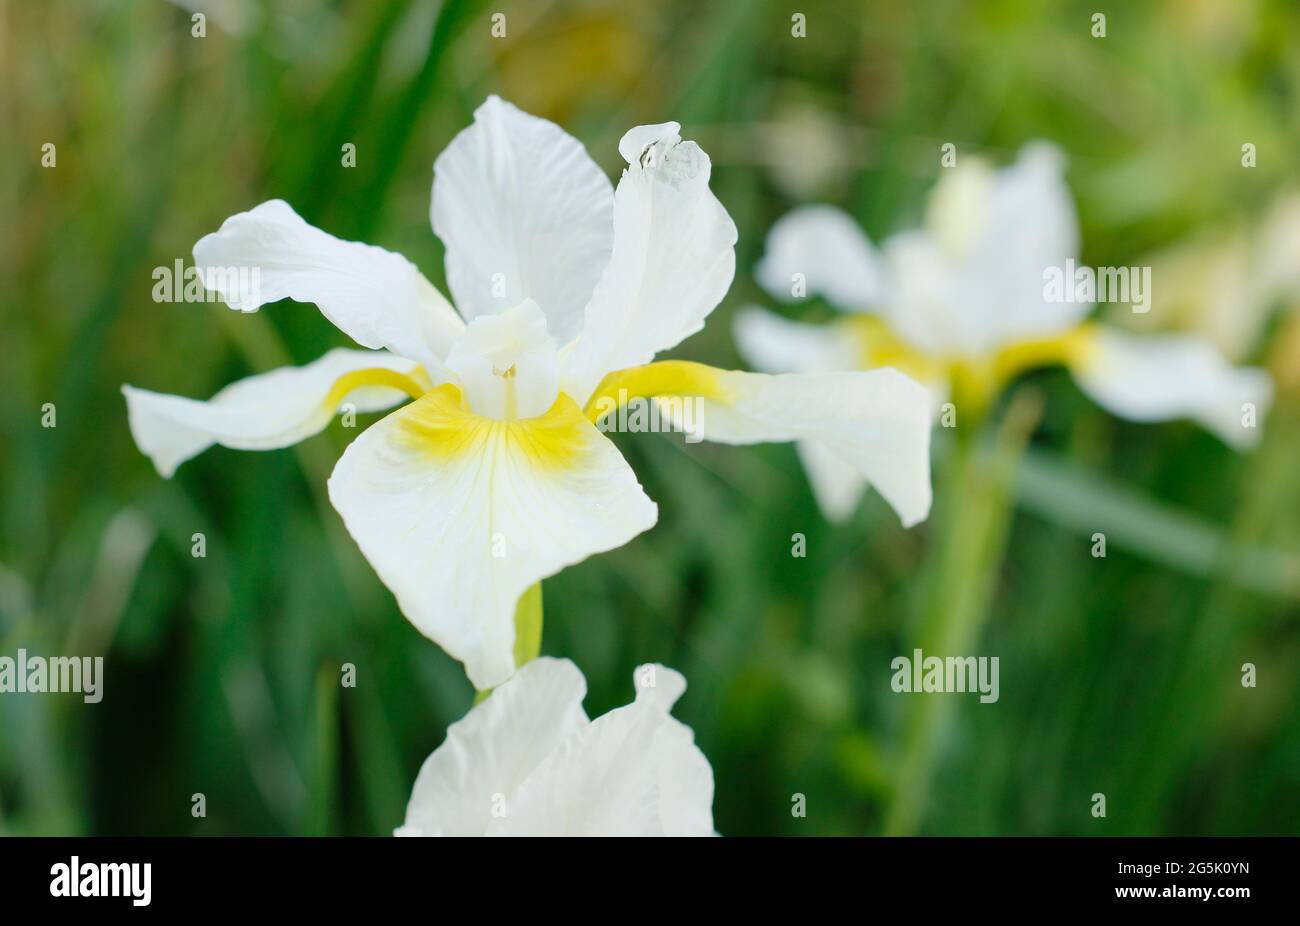 Iris sanguinea 'Snow Queen'.Siberian iris 'Snow Queen displaying characteristic white blooms with yellow throats. Stock Photo